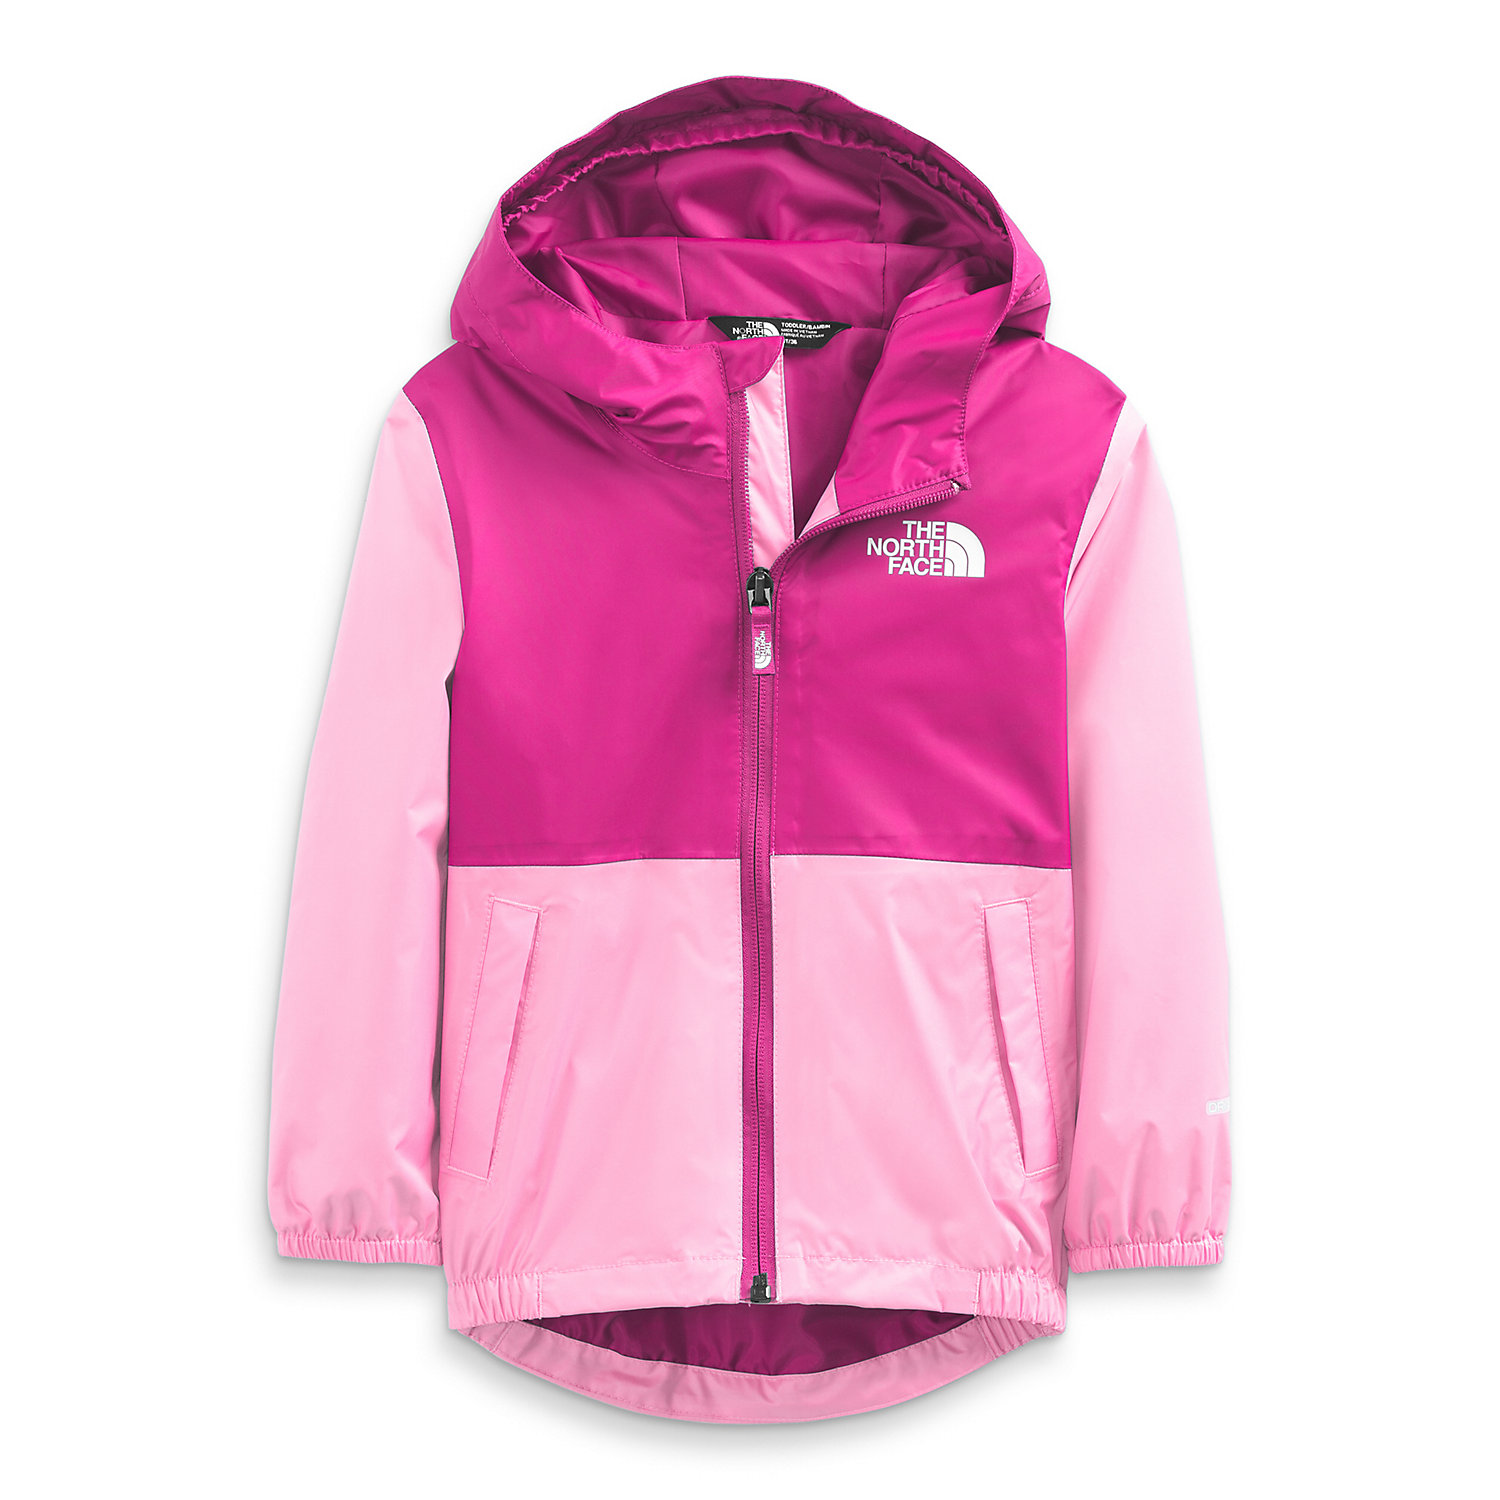 The North Face Toddlers Zipline Rain Jacket